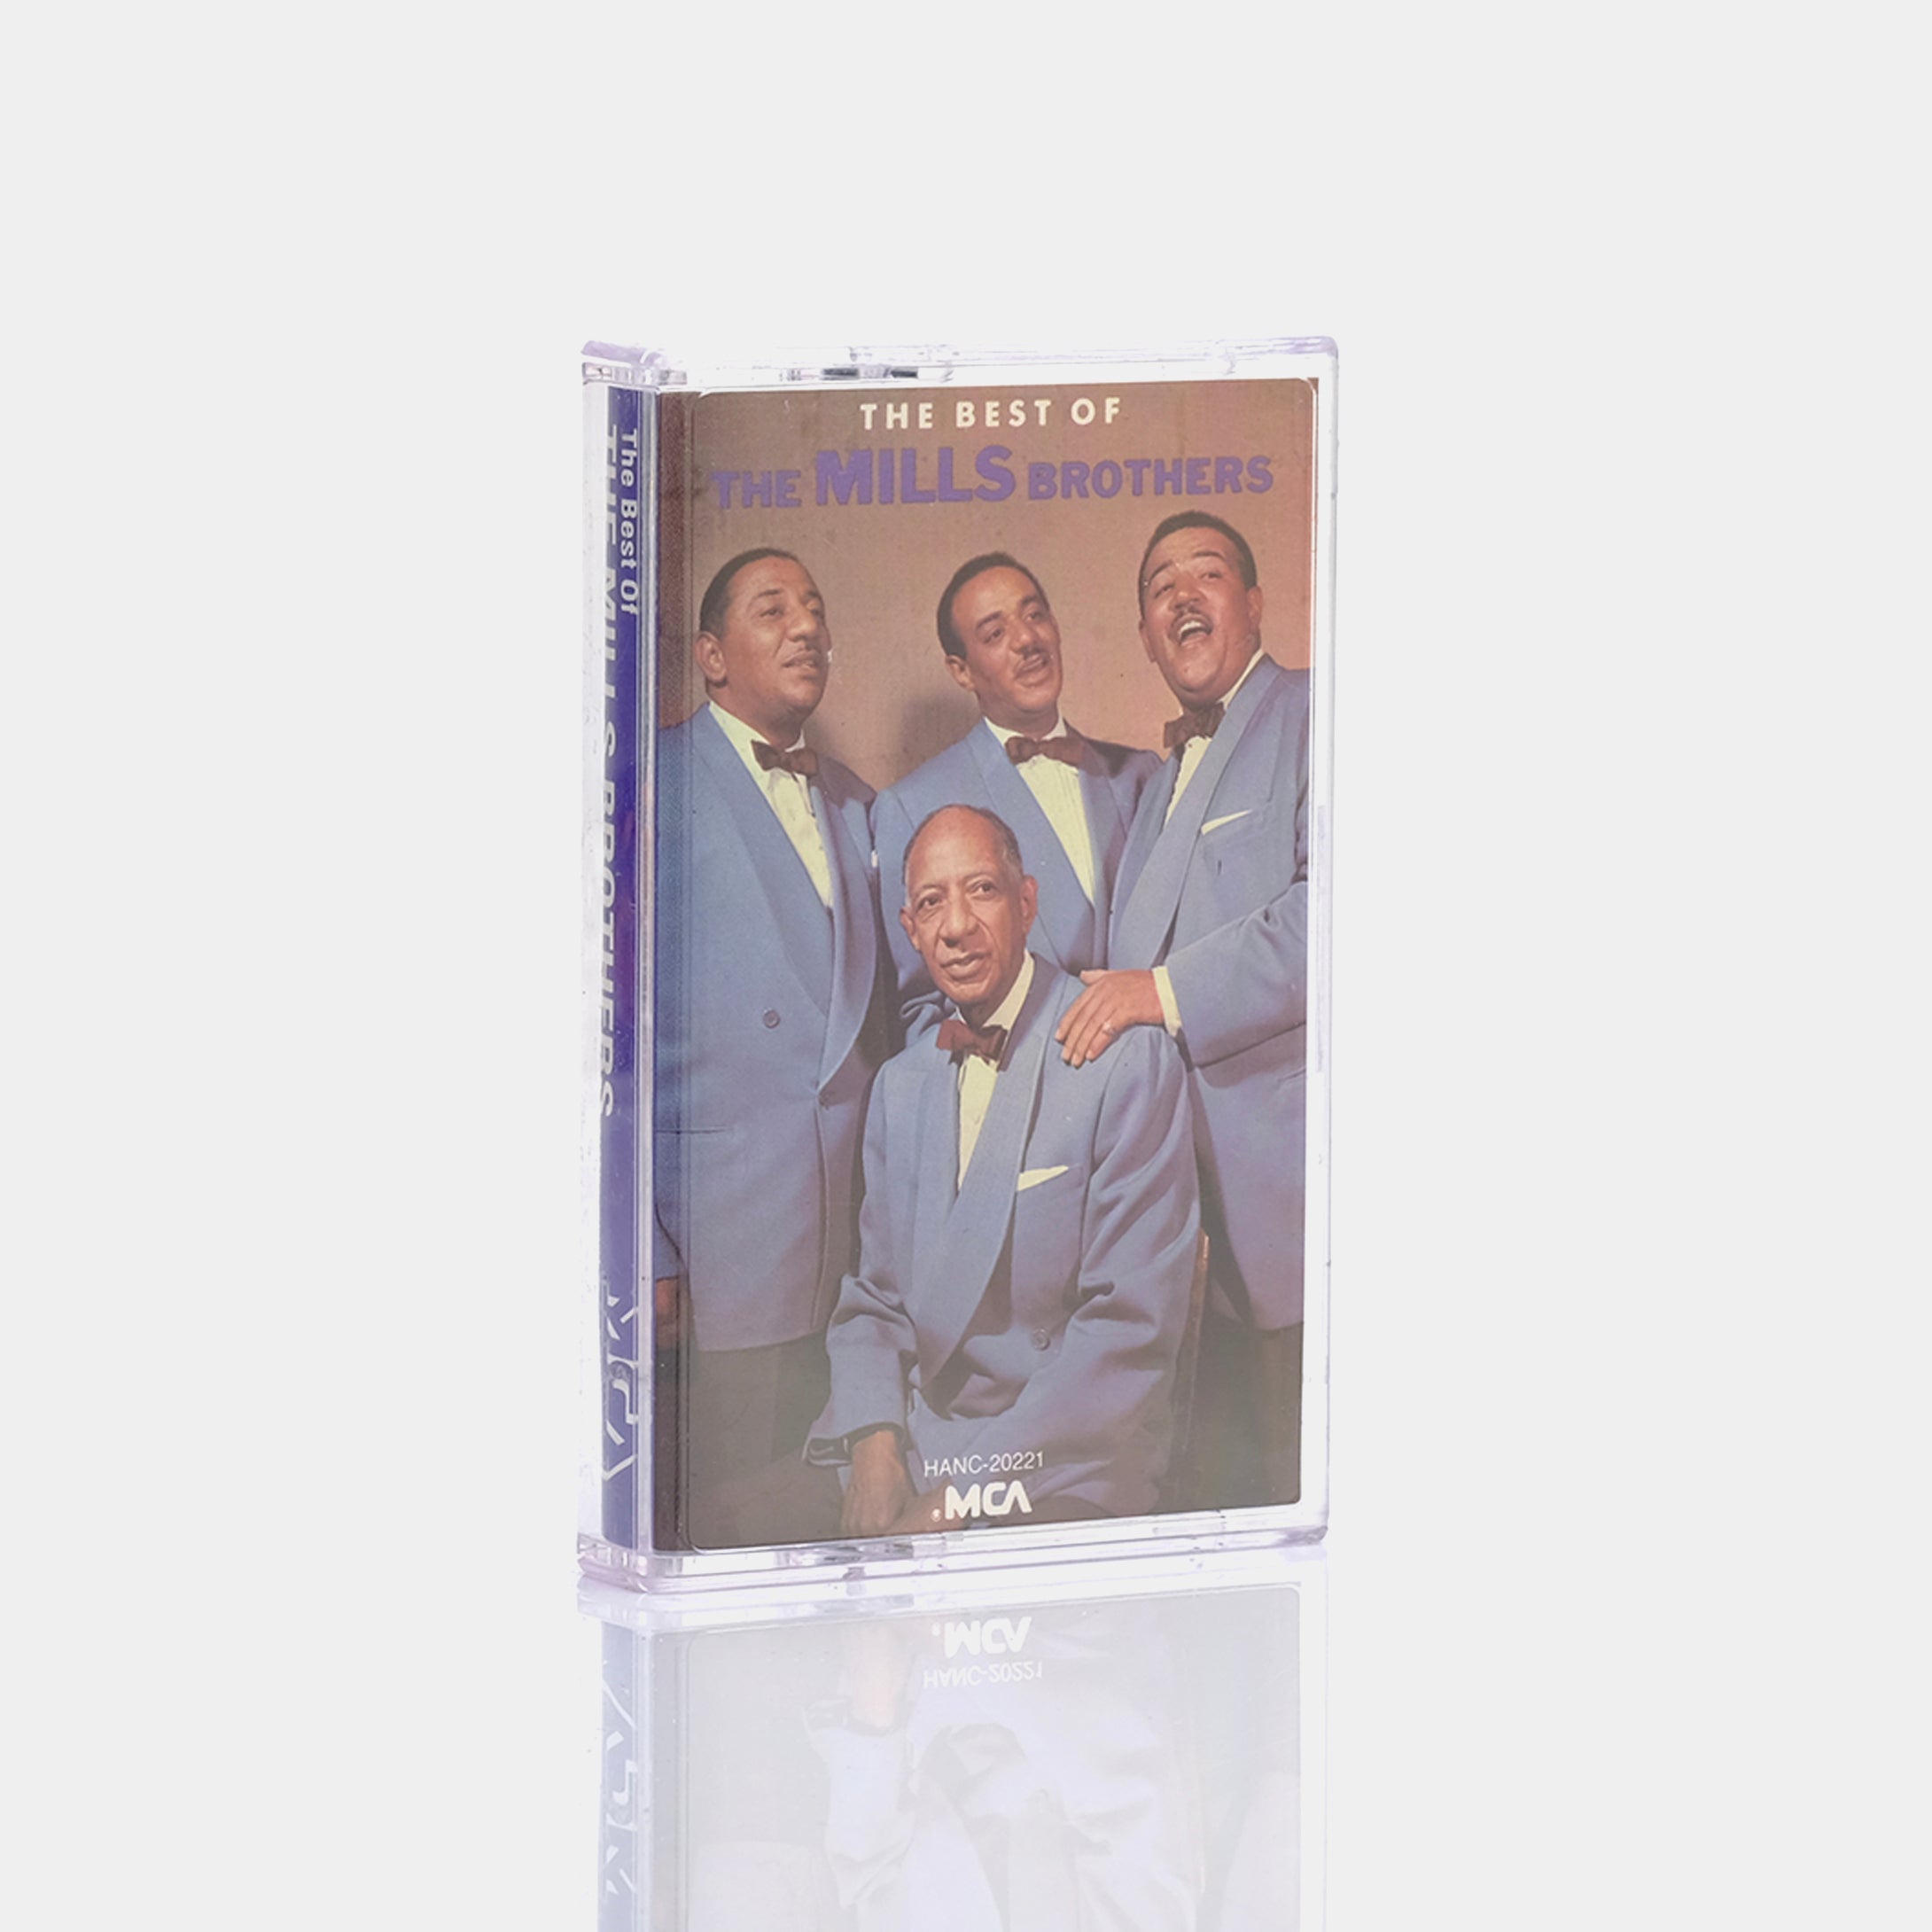 The Mills Brothers - The Best of the Mills Brothers Cassette Tape